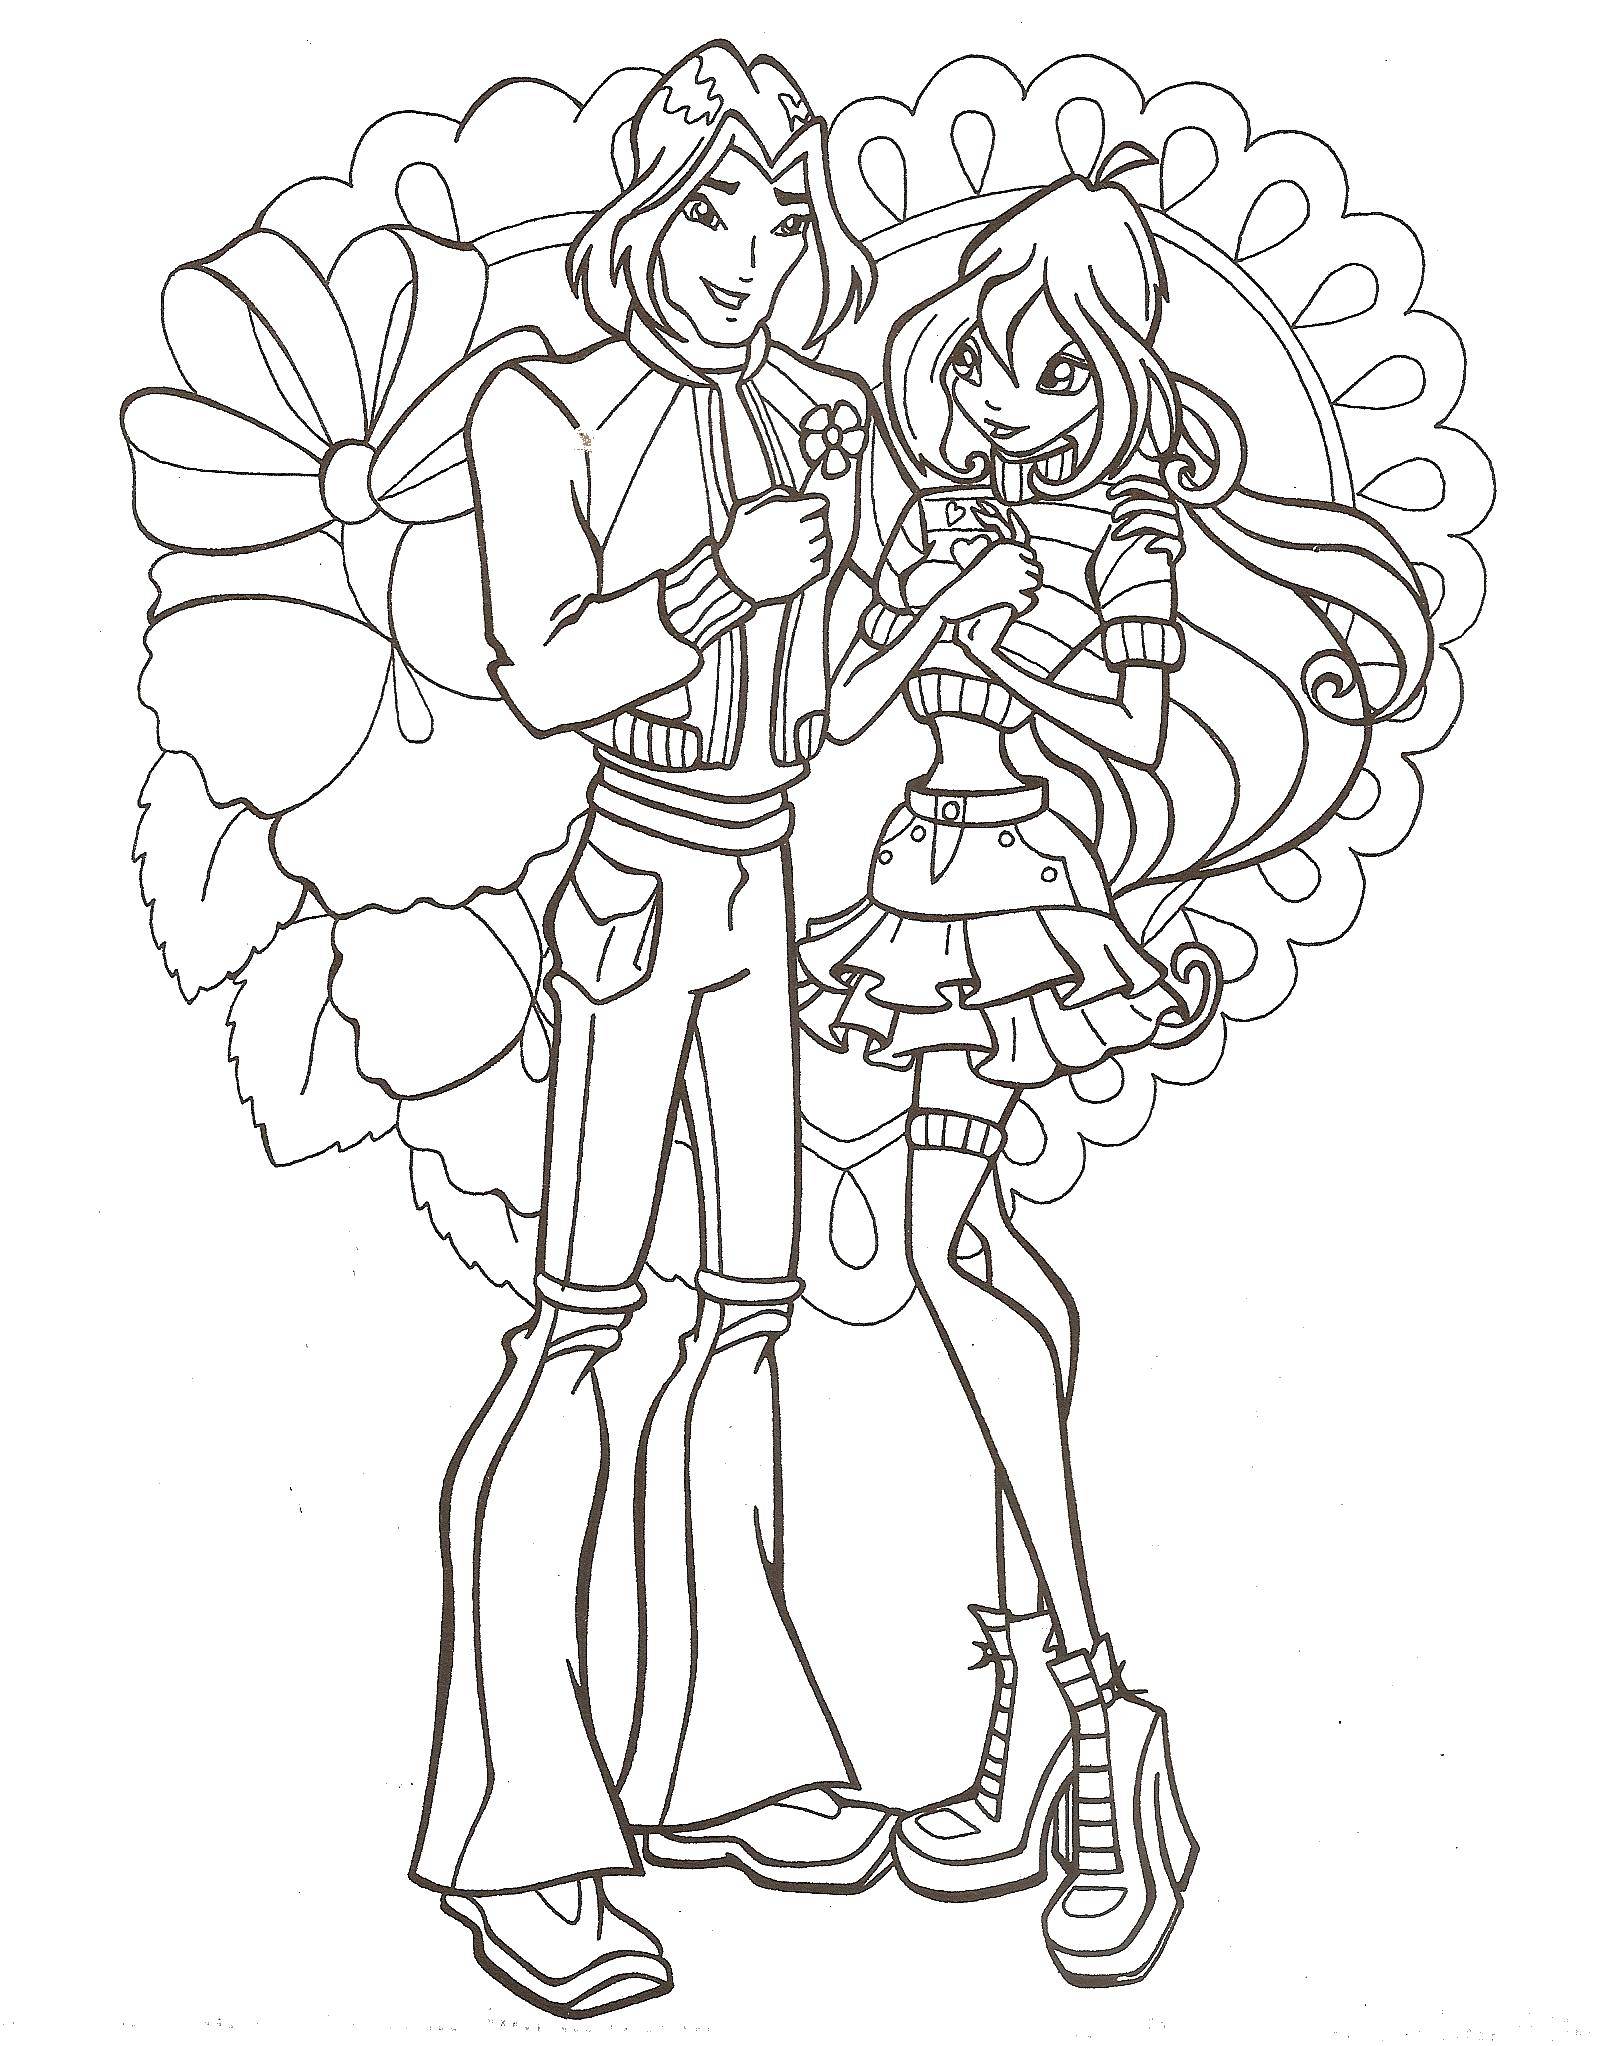 Coloring Bloom with a guy. Category Winx. Tags:  Character cartoon, Winx.